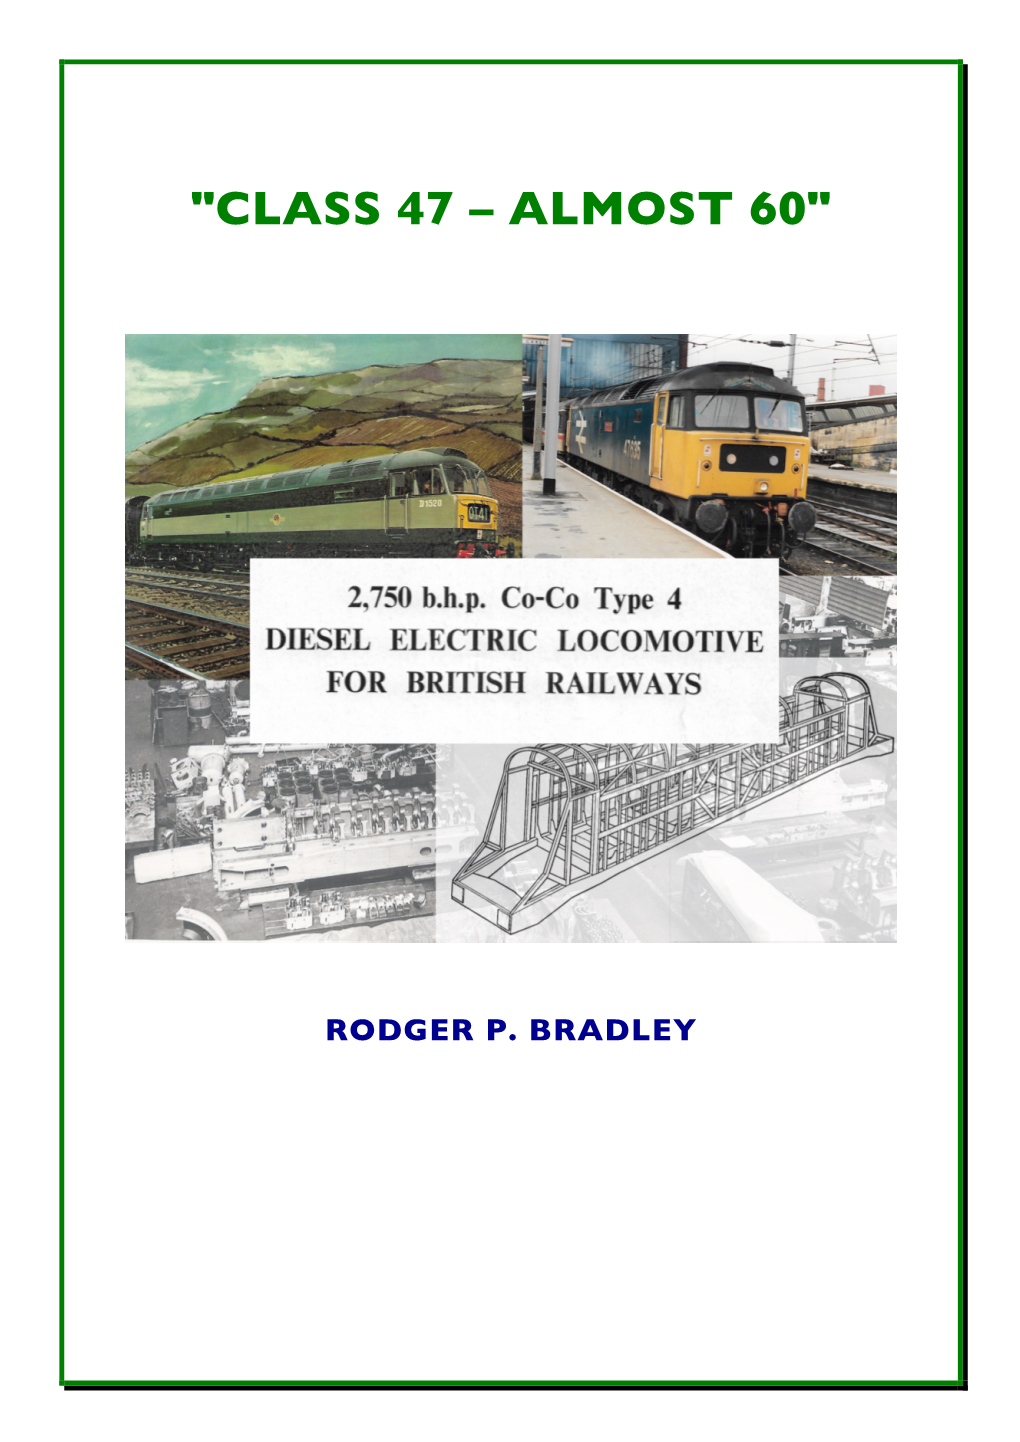 "Class 47 – Almost 60"